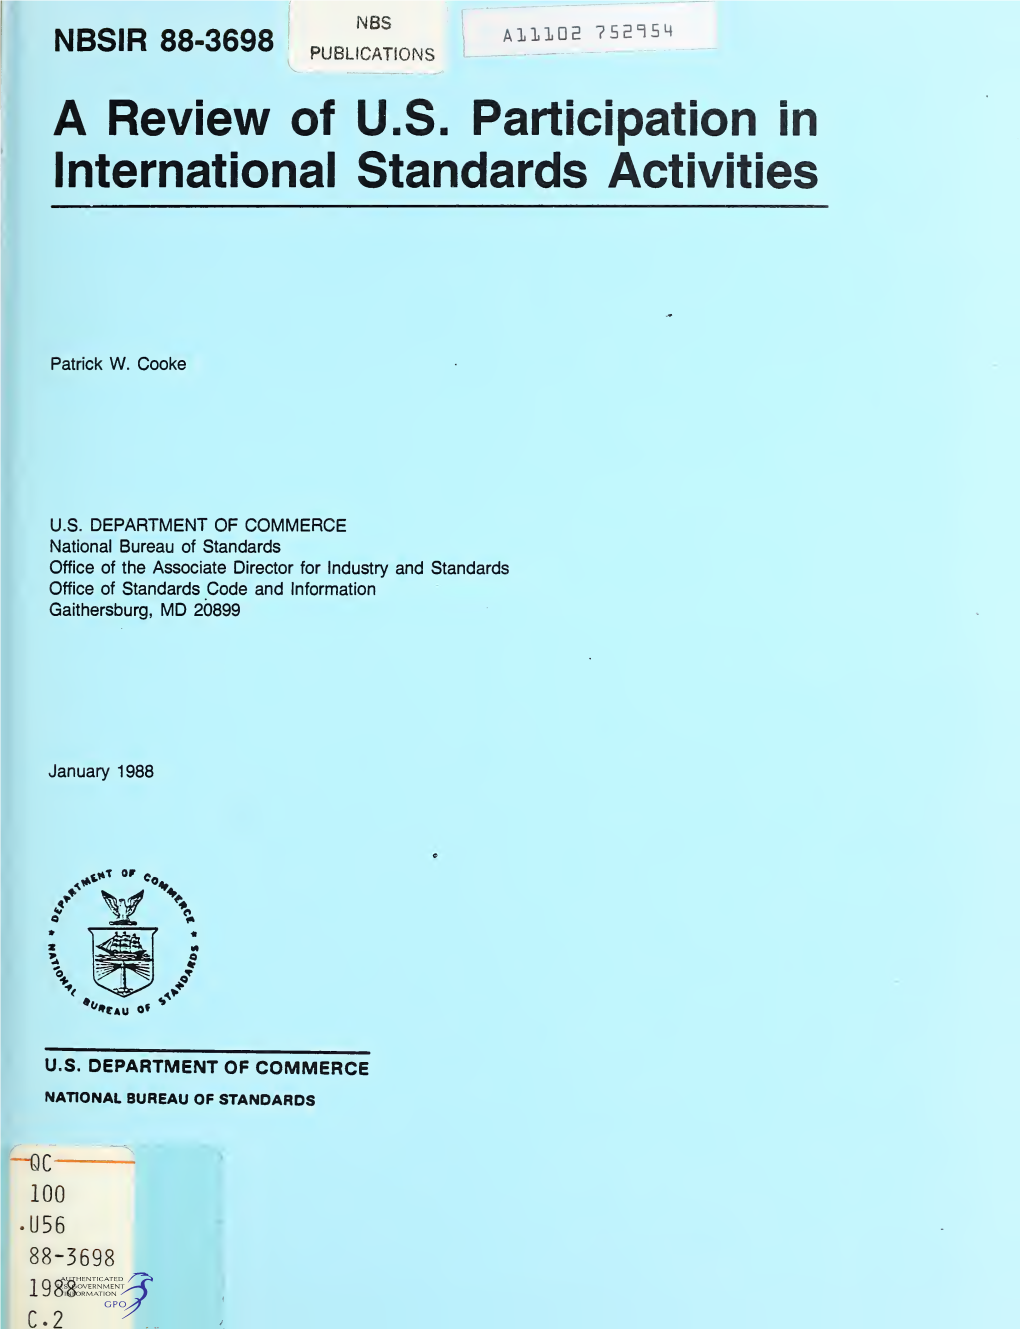 A Review of U. S. Participation in International Standards Activities